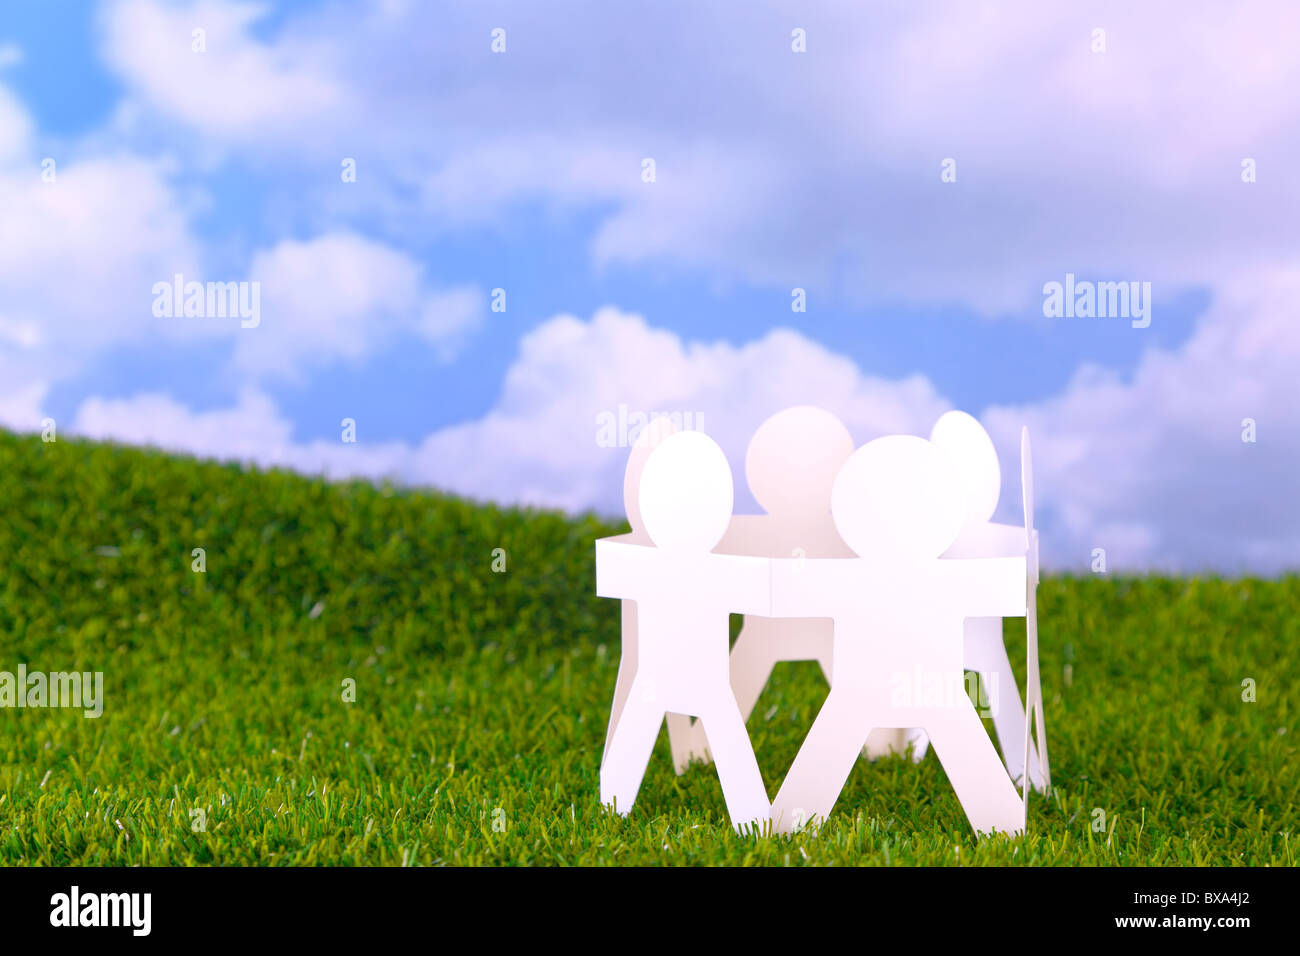 Concept image circle of paper men holding hands in a field with sky background Stock Photo